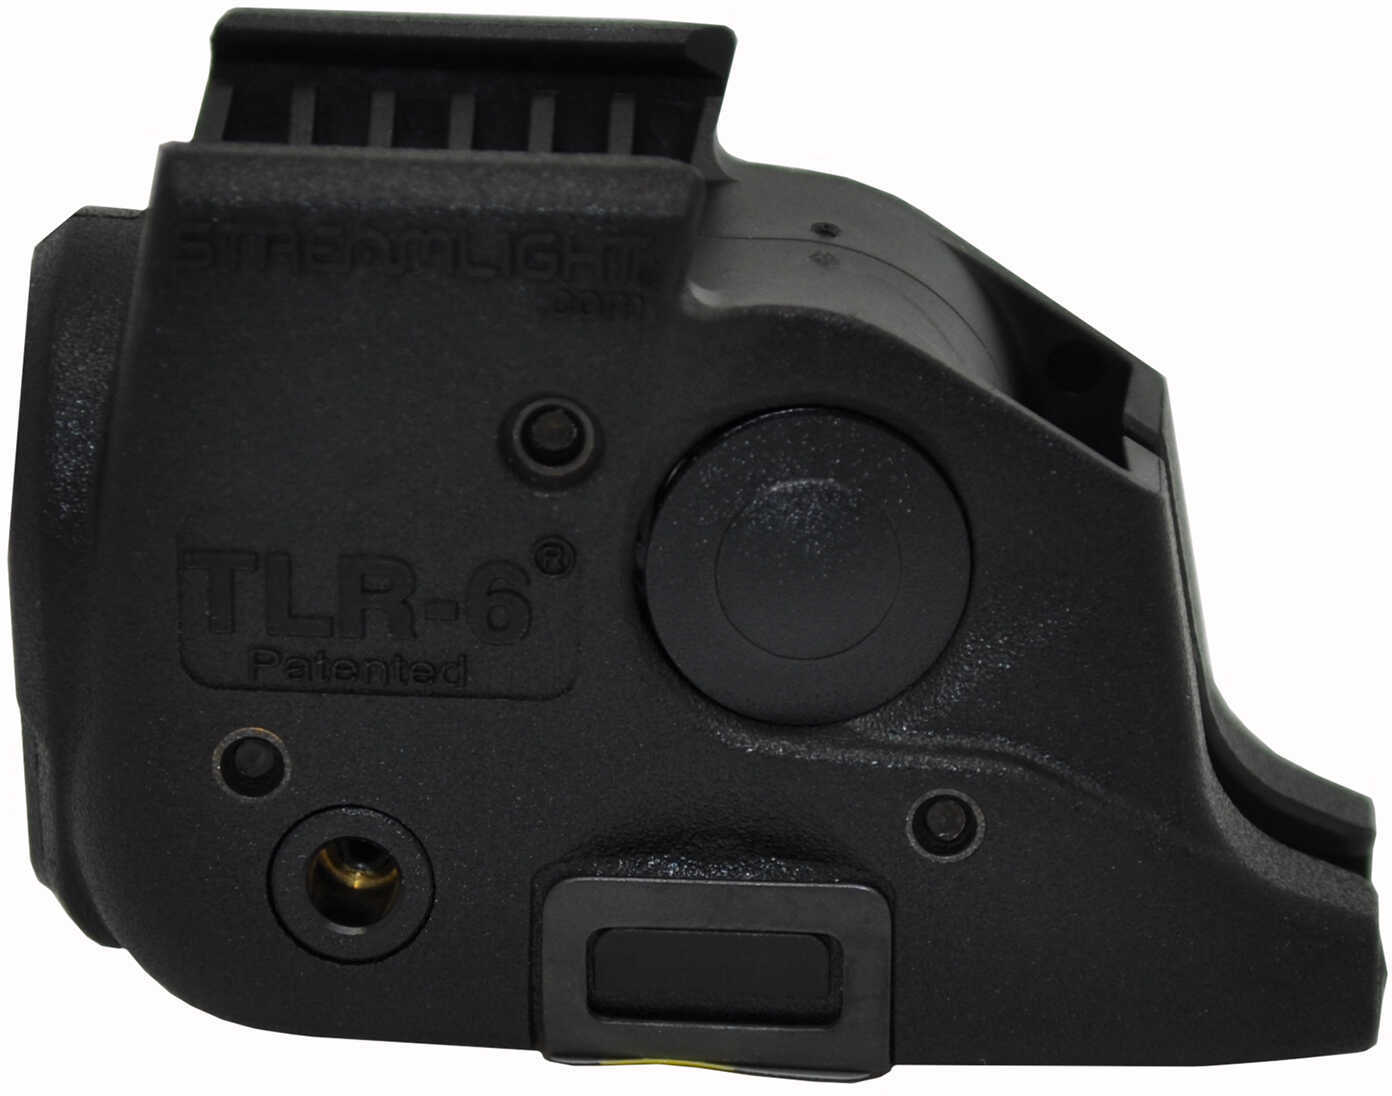 Streamlight TLR-6 Tac Light w/laser S&W M&P With Rail White LED and Red Laser Includes 2 CR 1/3N Lithium Batteries Black